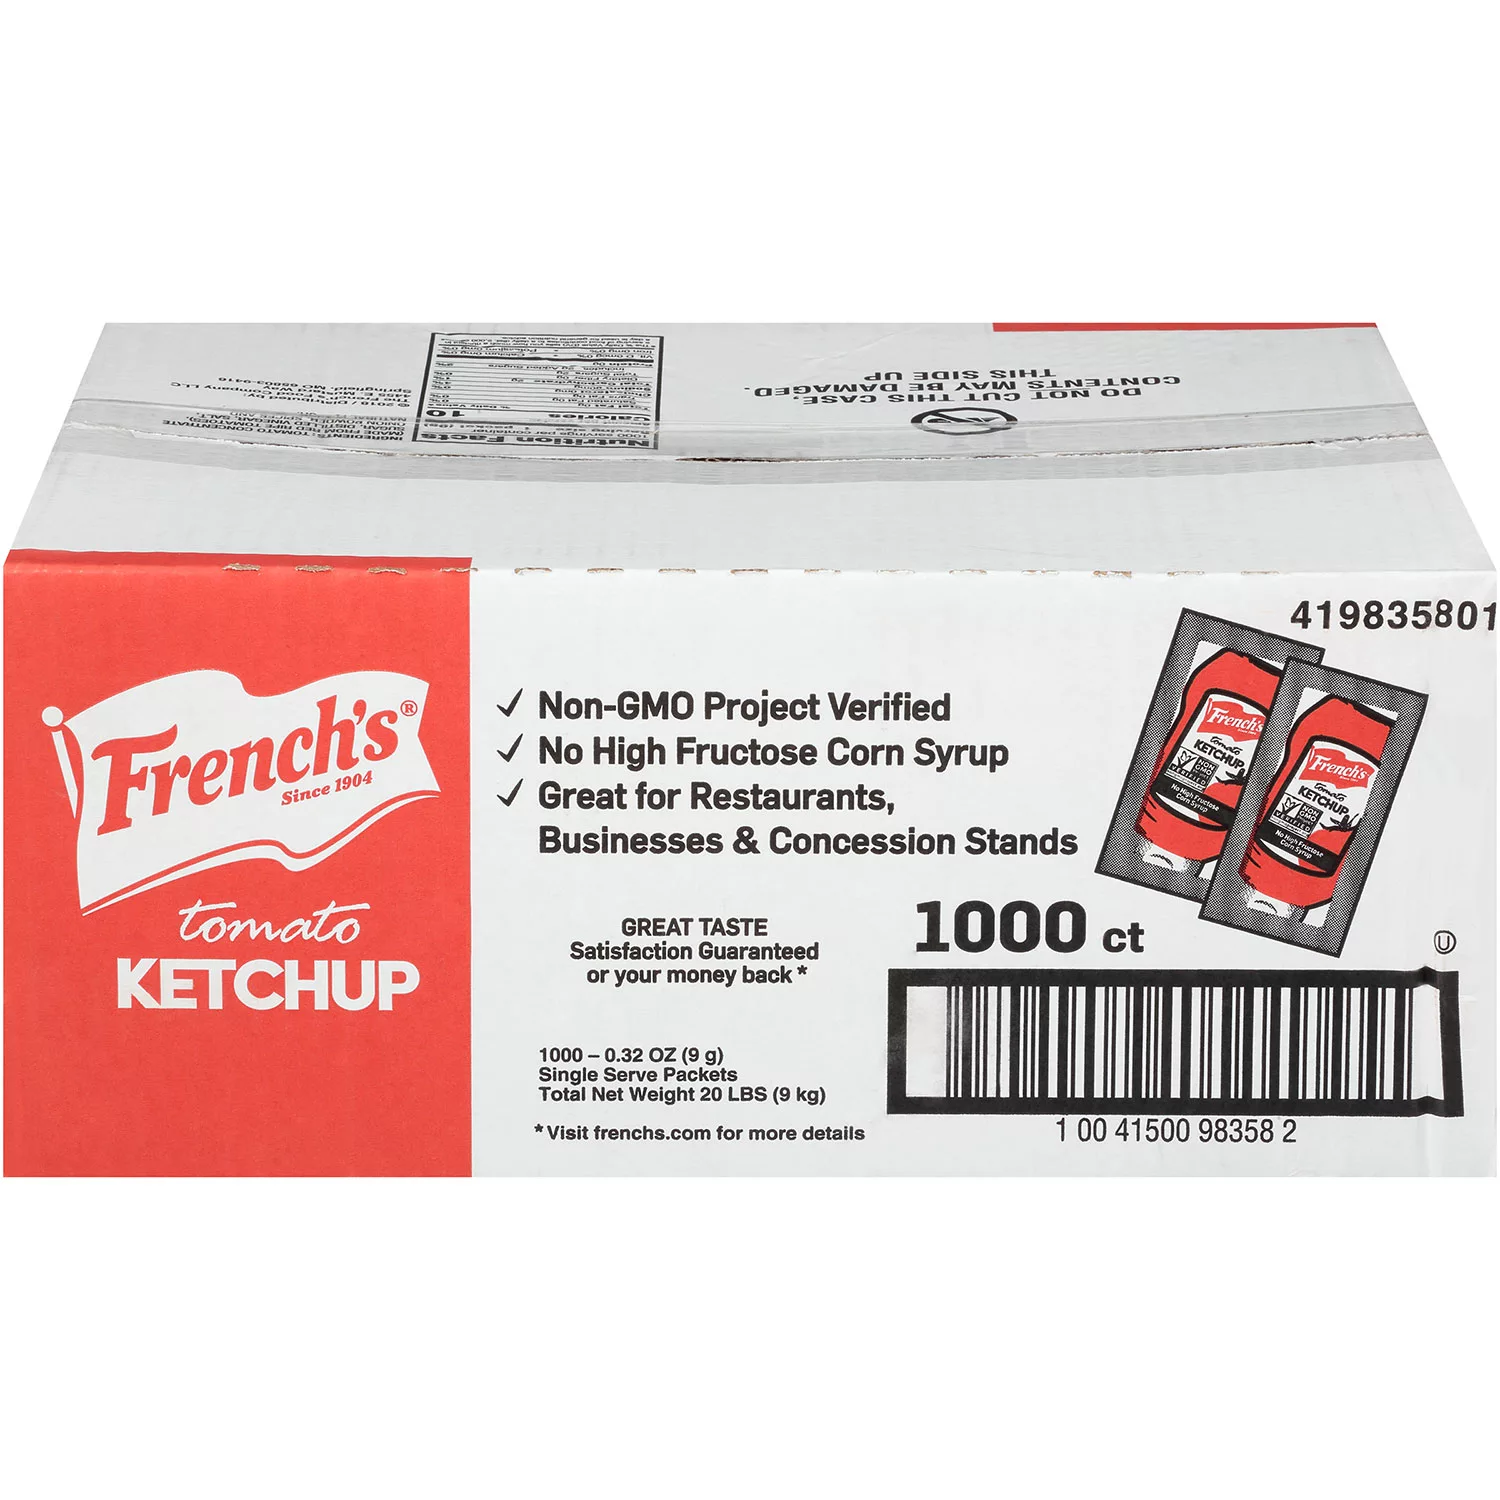 French's Tomato Ketchup Single-Serve Packets